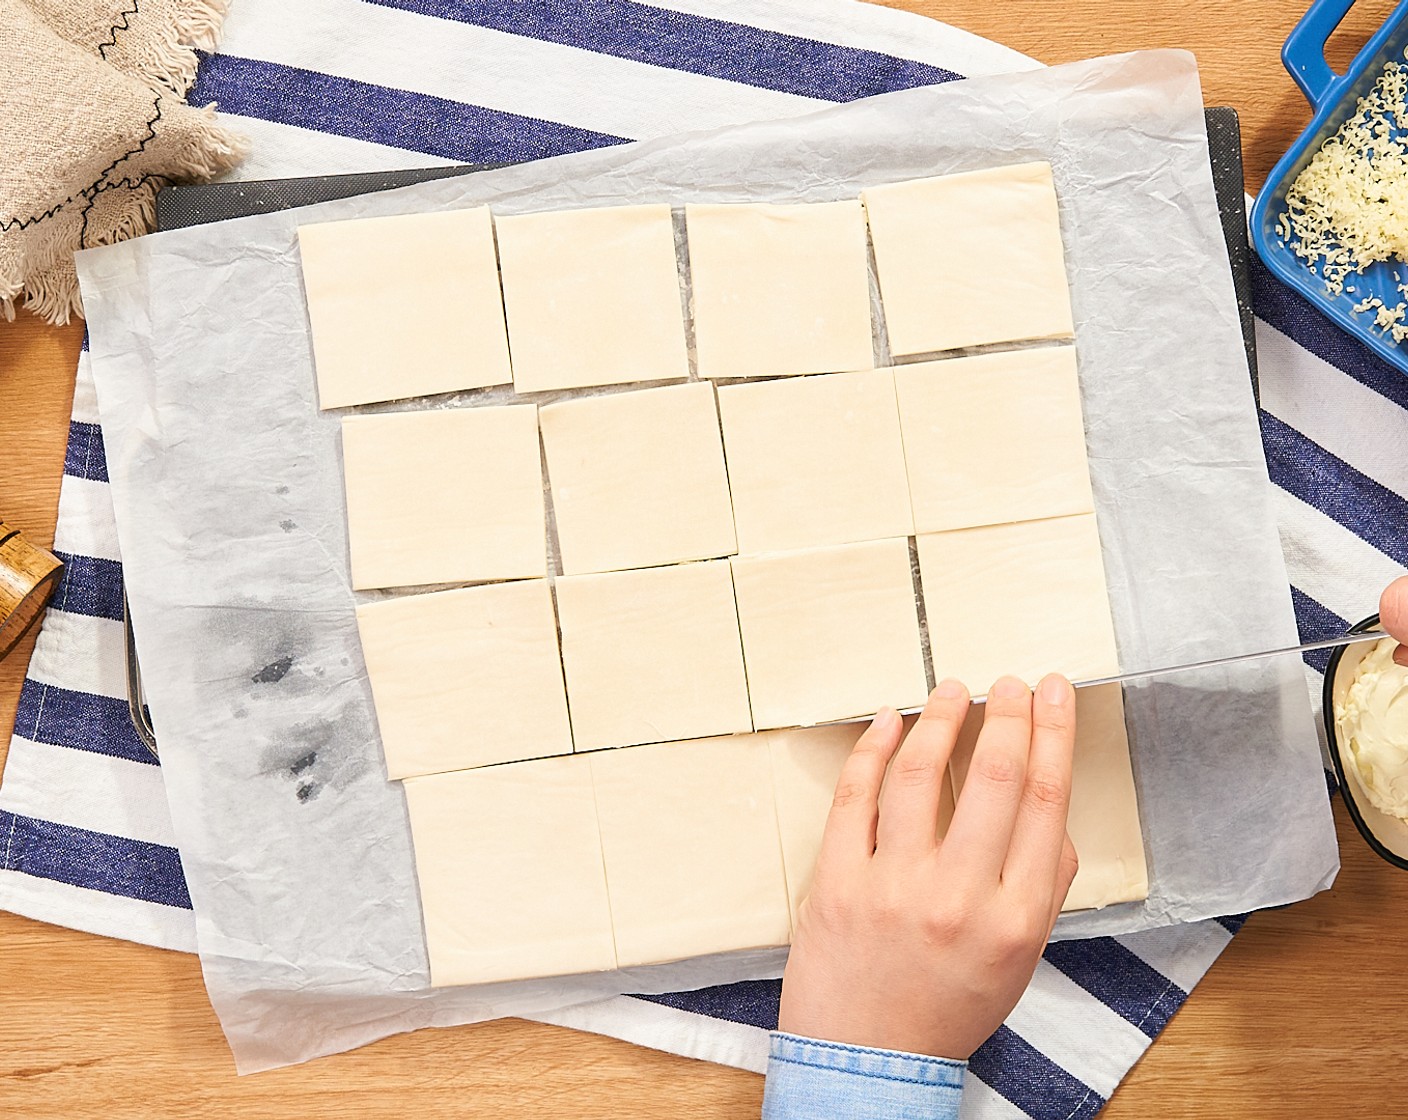 step 2 Cut the Puff Pastry (2 sheets) into an equal square of about 2.3x2.3-inches (6x6 cm). Set aside in the refrigerator.